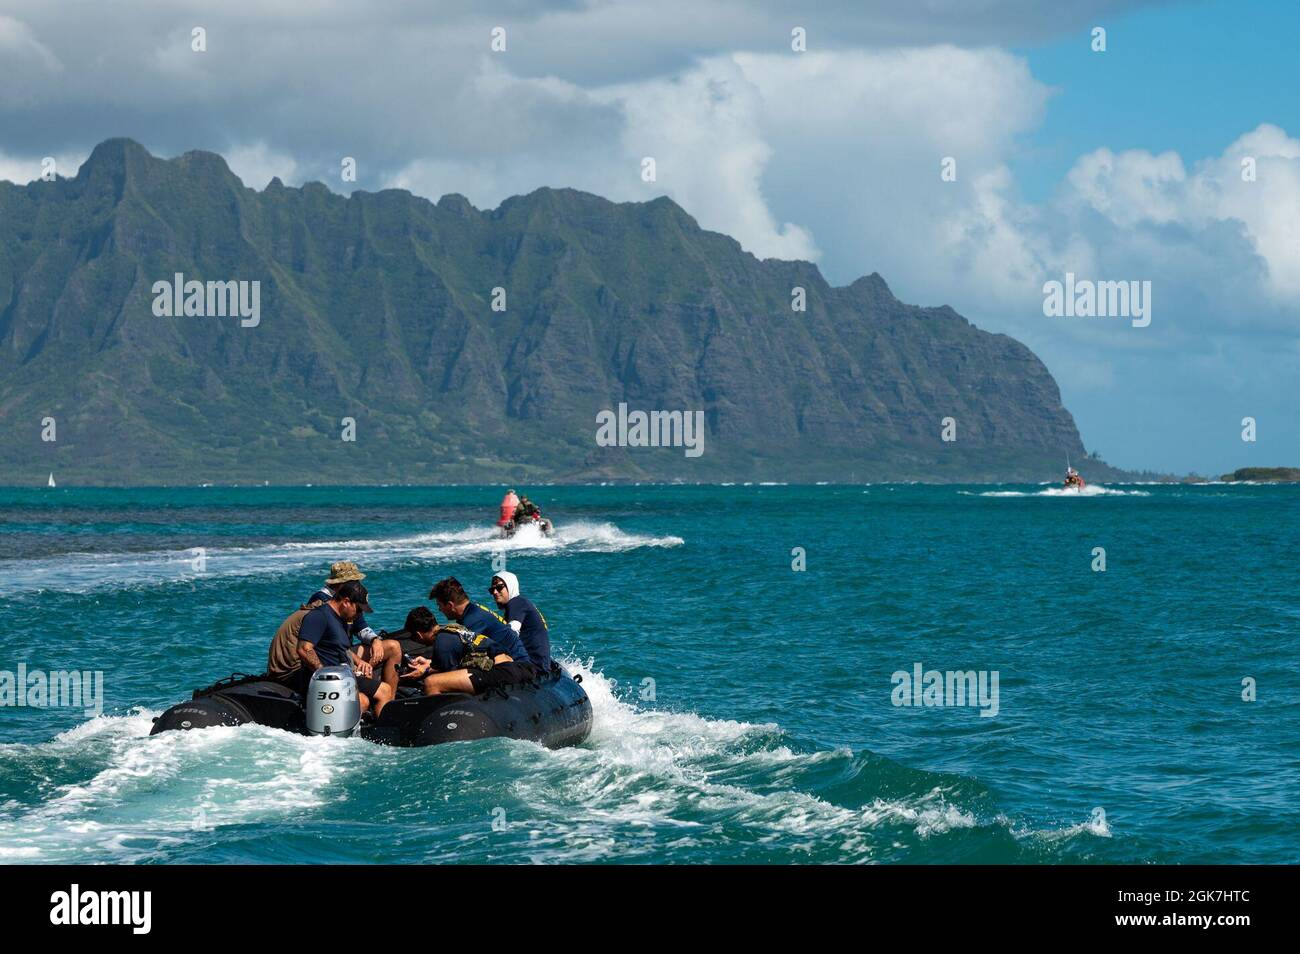 210826-N-OT701-1006 KANEOHE BAY, Hawaii Aug. 26, 2021 -- Sailors assigned to Mobile Diving and Salvage Unit ONE Detachment Explosive Ordnance Disposal Group (MDSU ONE DET EOD) operate in Kaneohe Bay to remove unexploded ordnance Stock Photo